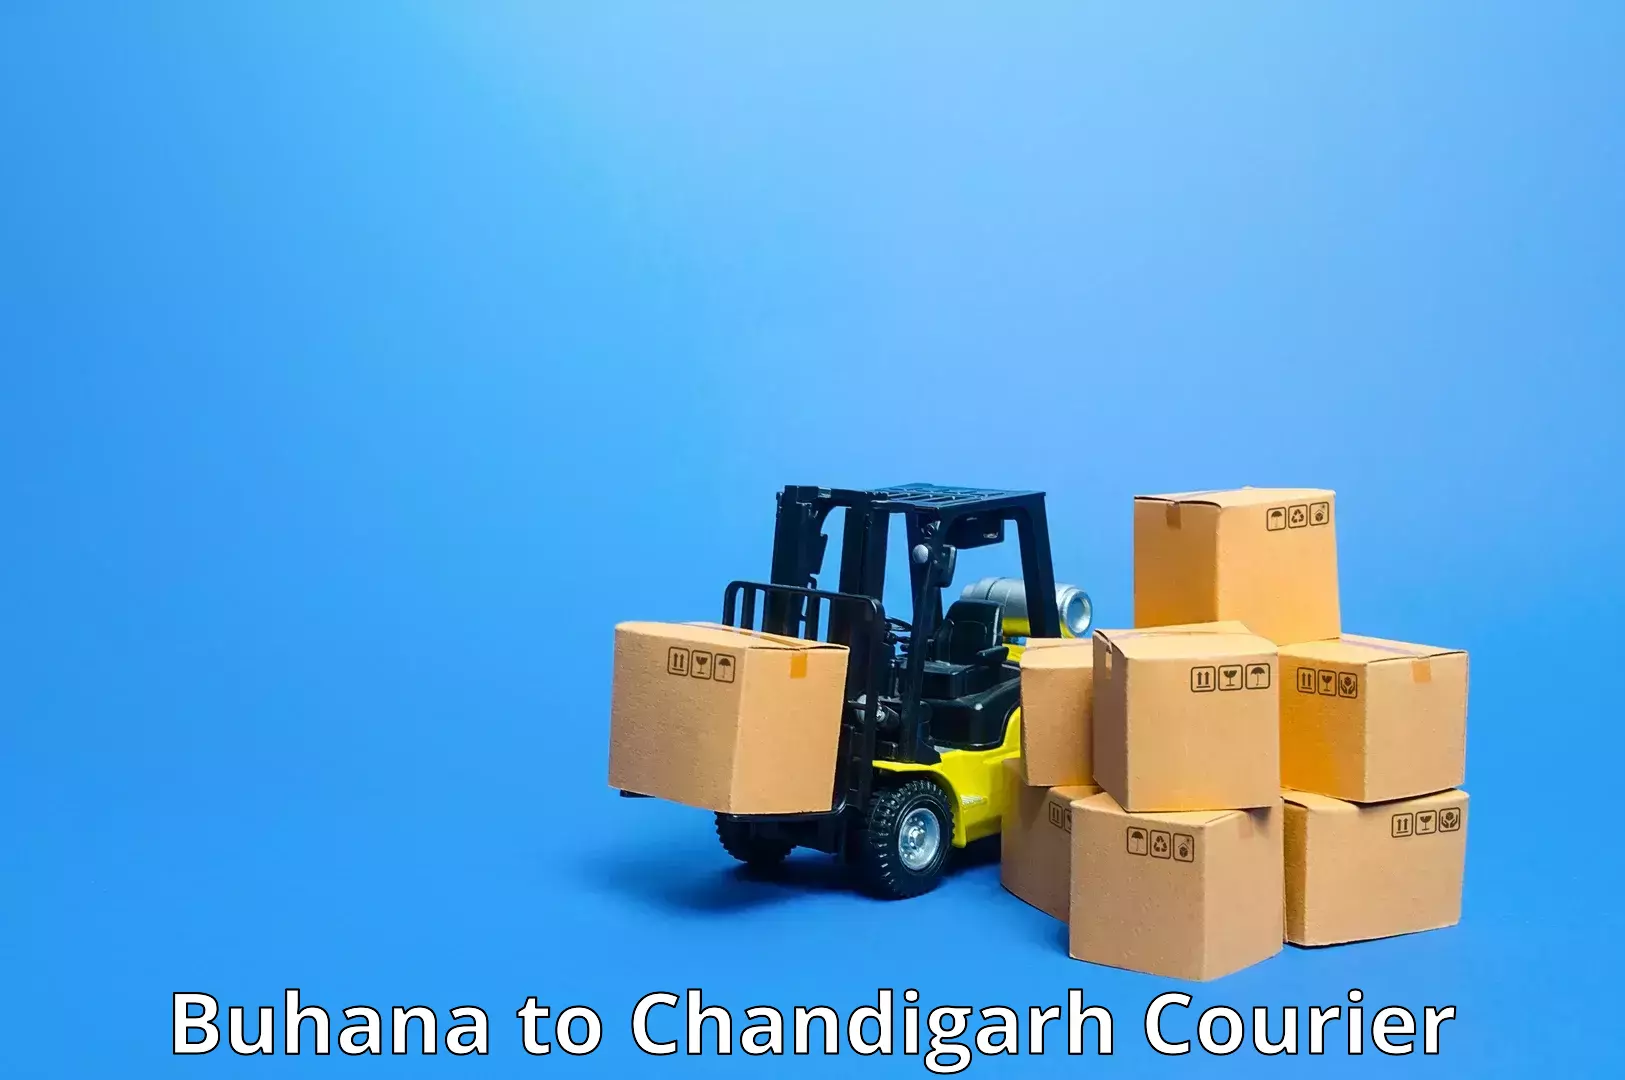 Tailored shipping plans Buhana to Chandigarh